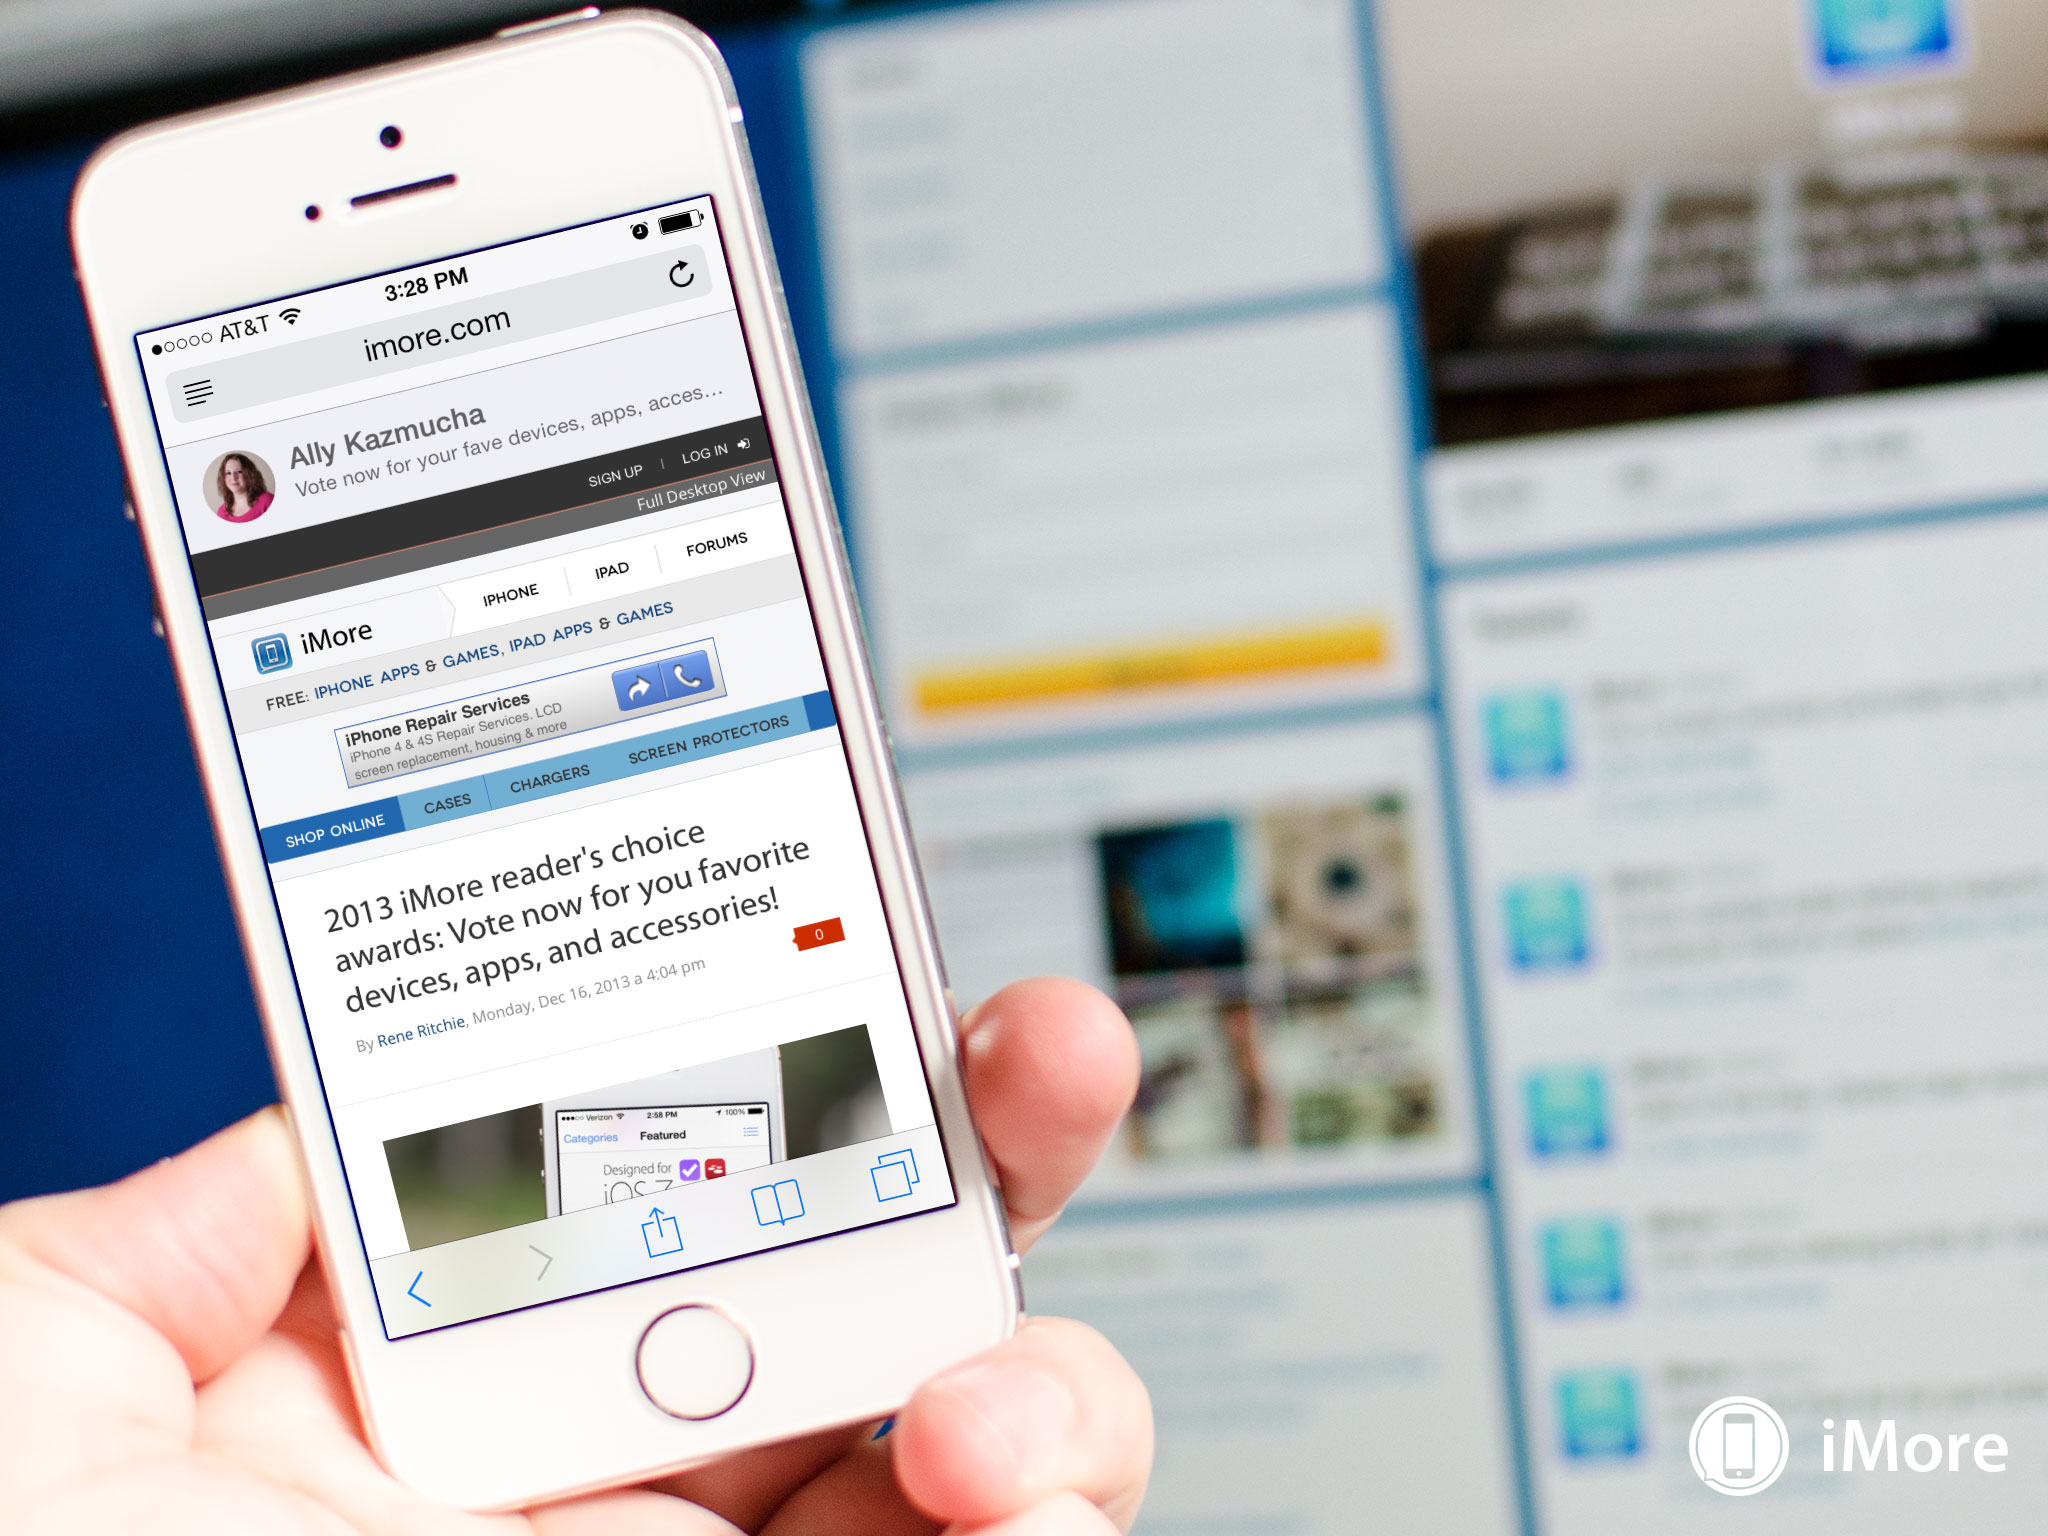 How to use the Shared Links feature in iOS 7 Safari